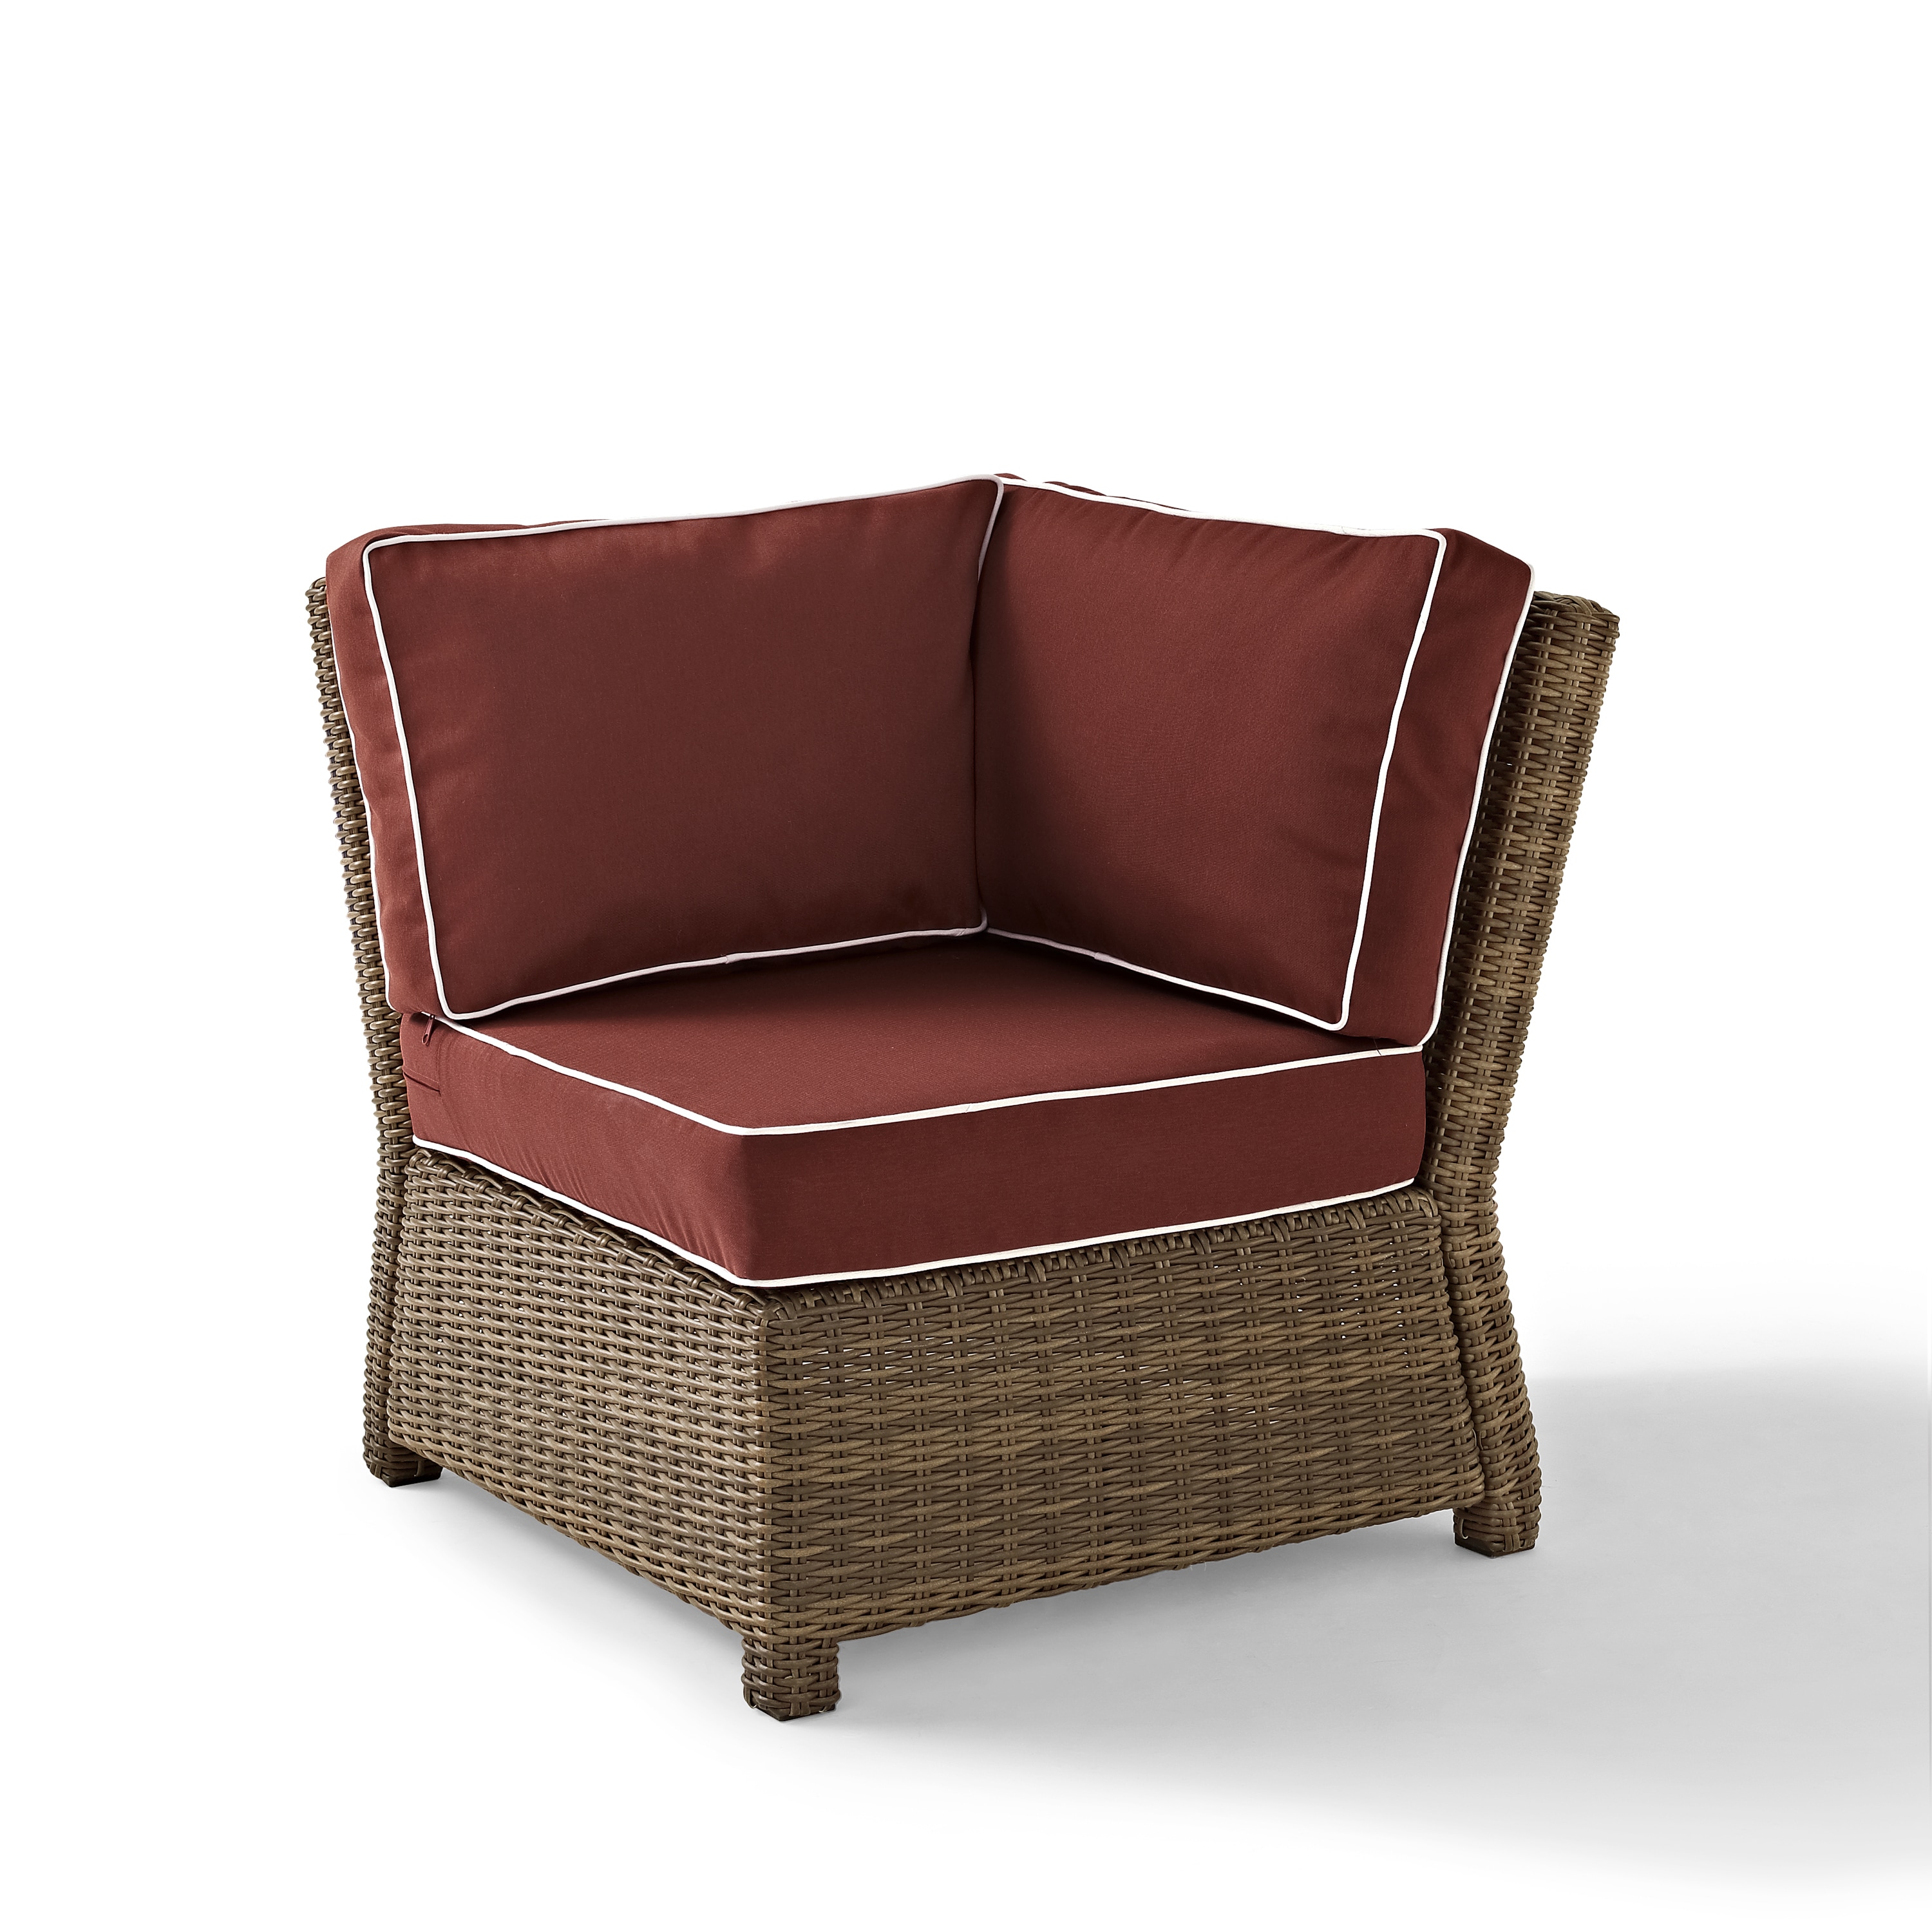 Bradenton Outdoor Wicker Sectional Corner Chair With Sangria Cushions - 31.5 W X 31.5 D X 32.5 H